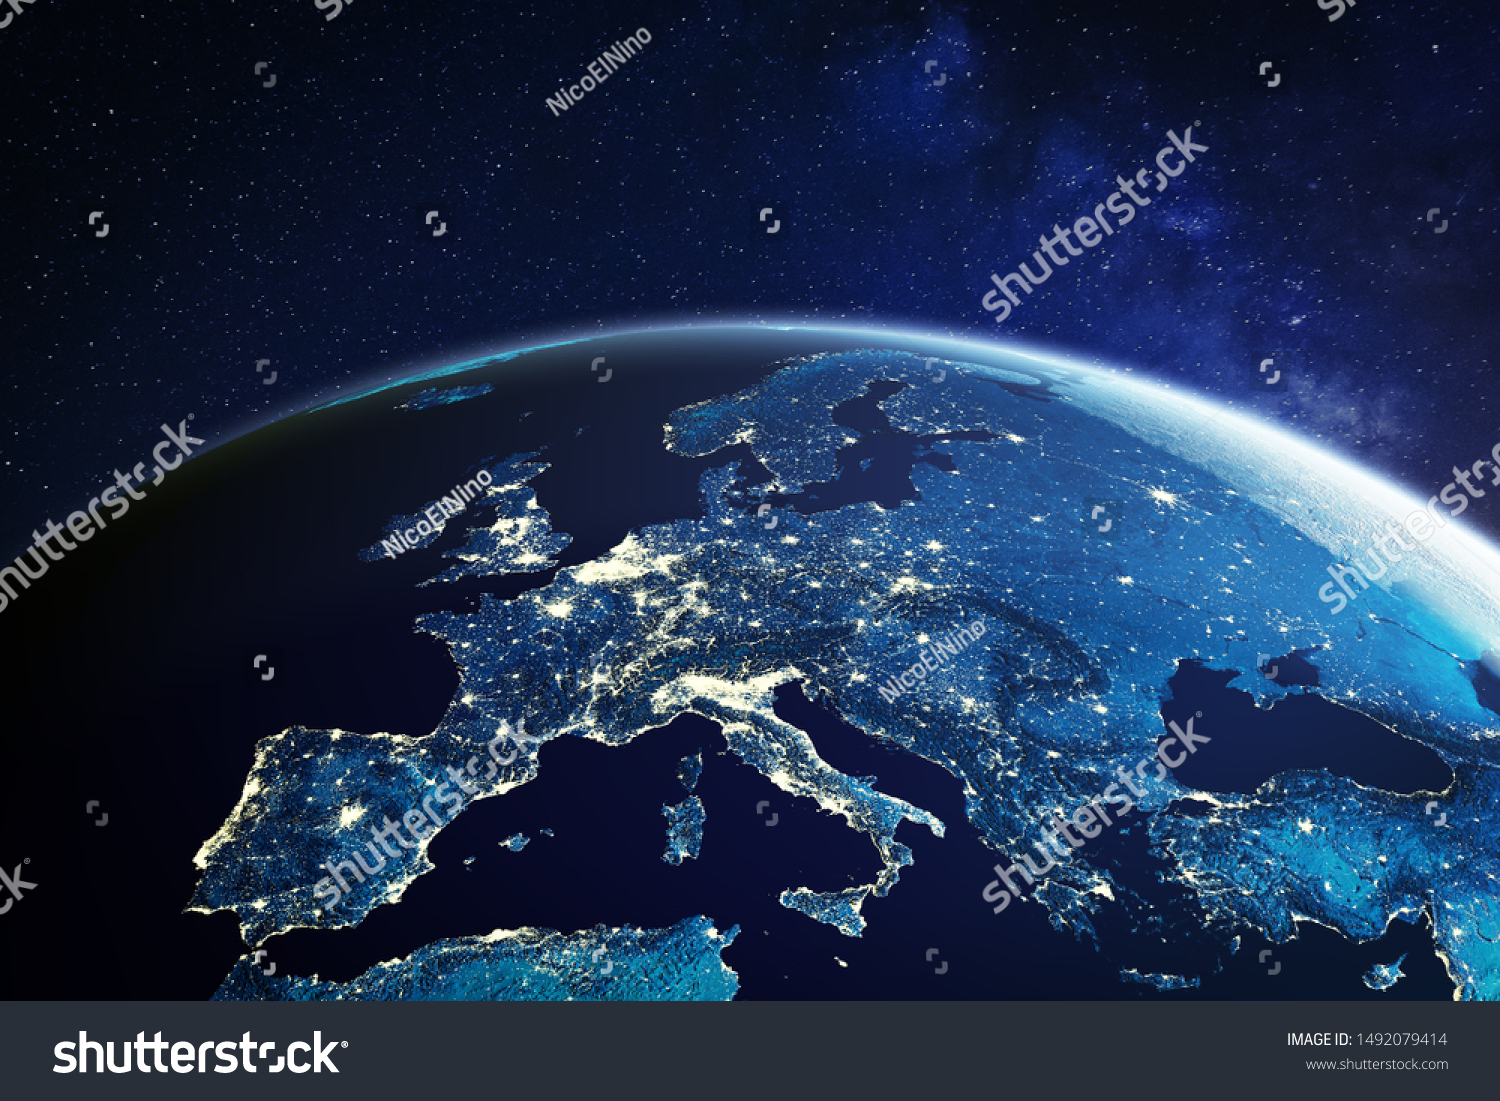 Europe from space at night with city lights showing European cities in Germany, France, Spain, Italy and United Kingdom (UK), global overview, 3d rendering of planet Earth, elements from NASA #1492079414